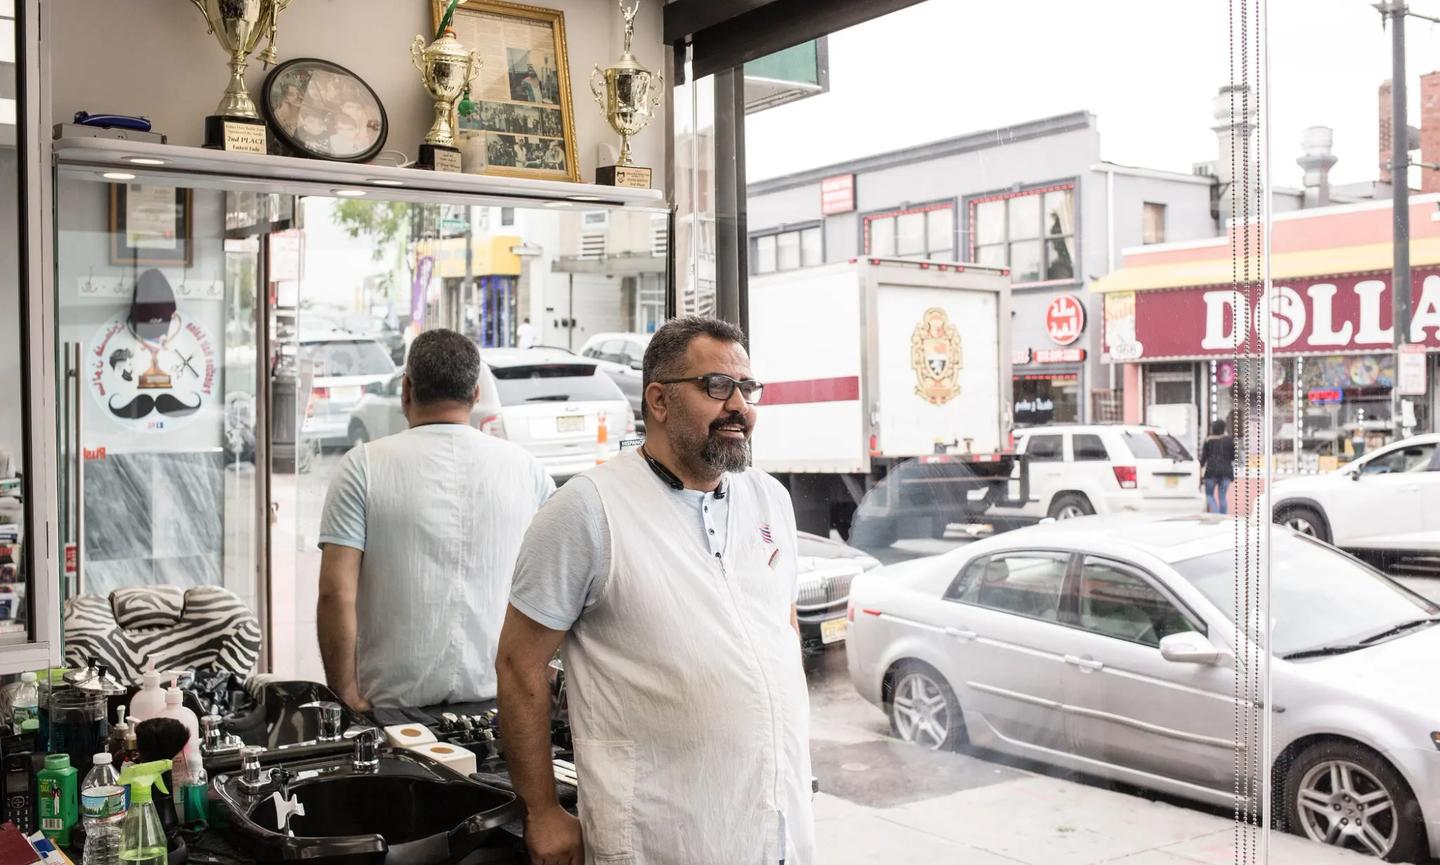 Palestine Hair Salon in Paterson New Jersey (photo cred: NY Times)